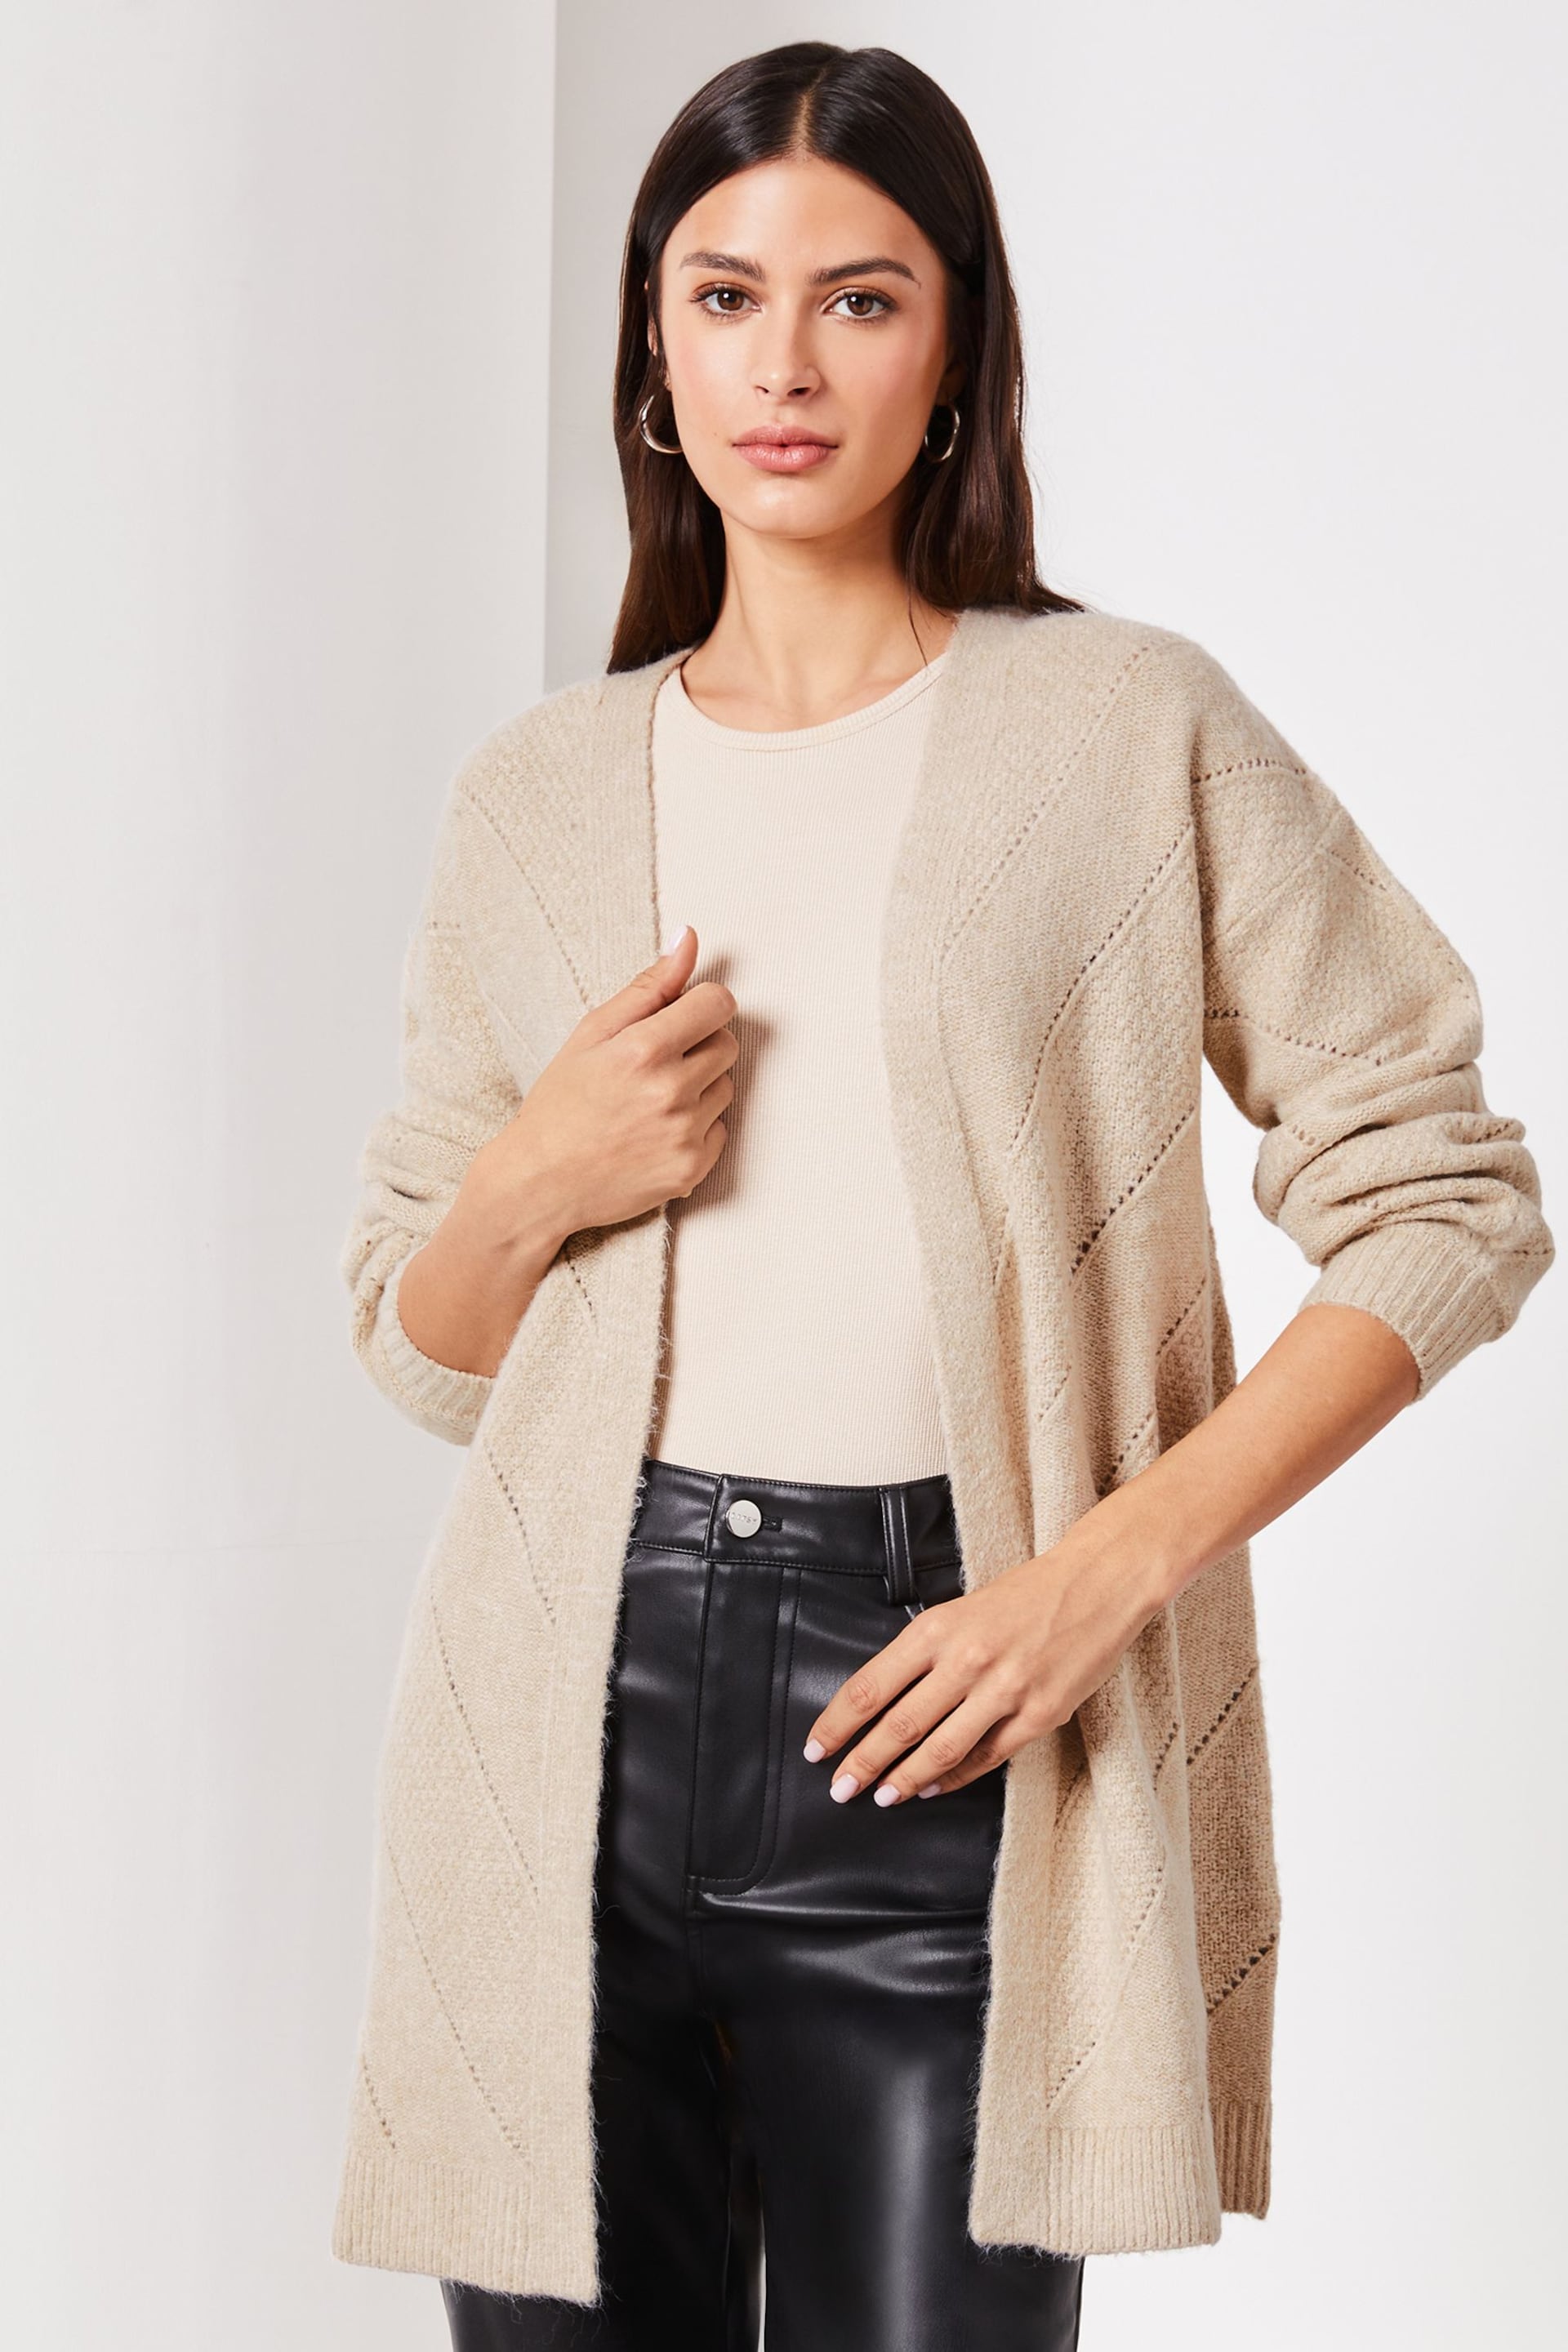 Lipsy Neutral Petite Long Sleeve Pointelle Knitted Cardigan - Image 1 of 4